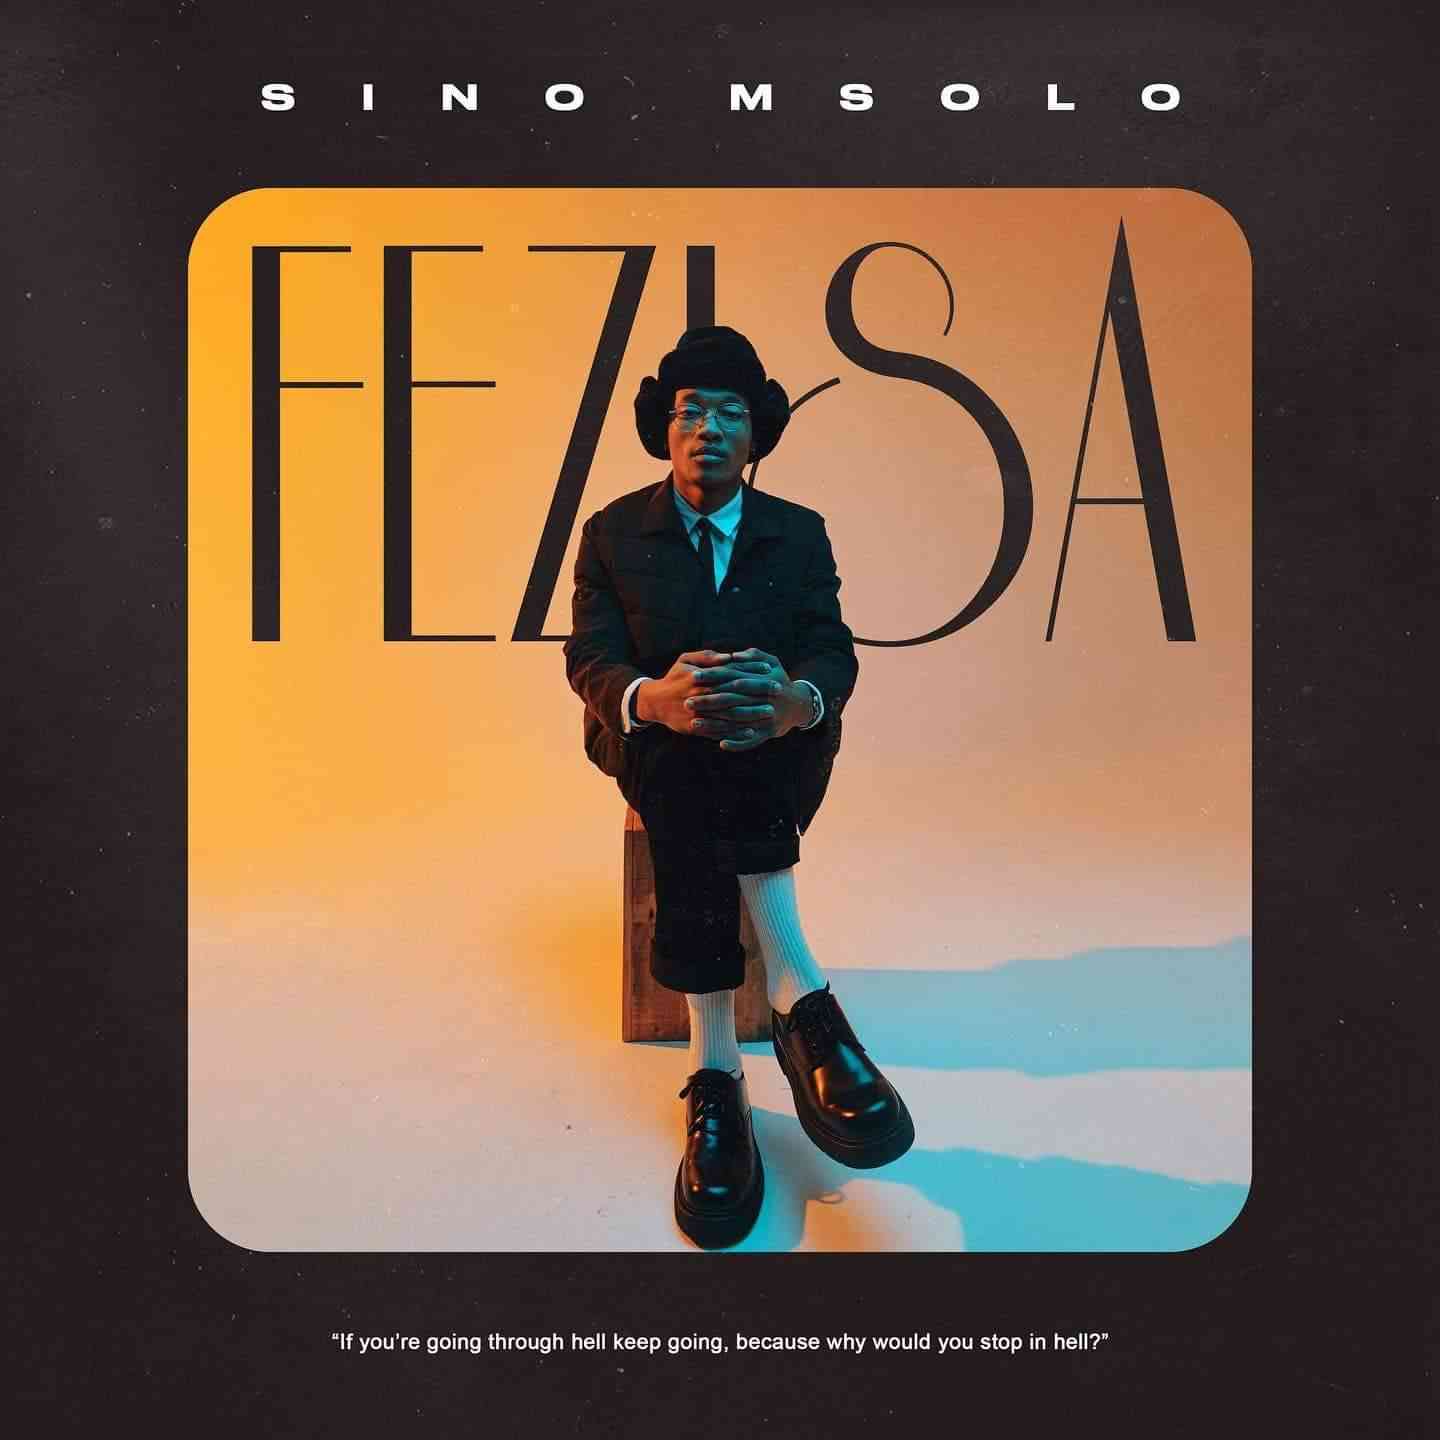 Sino Msolo Makes First Massive Appearance With Fezisa EP